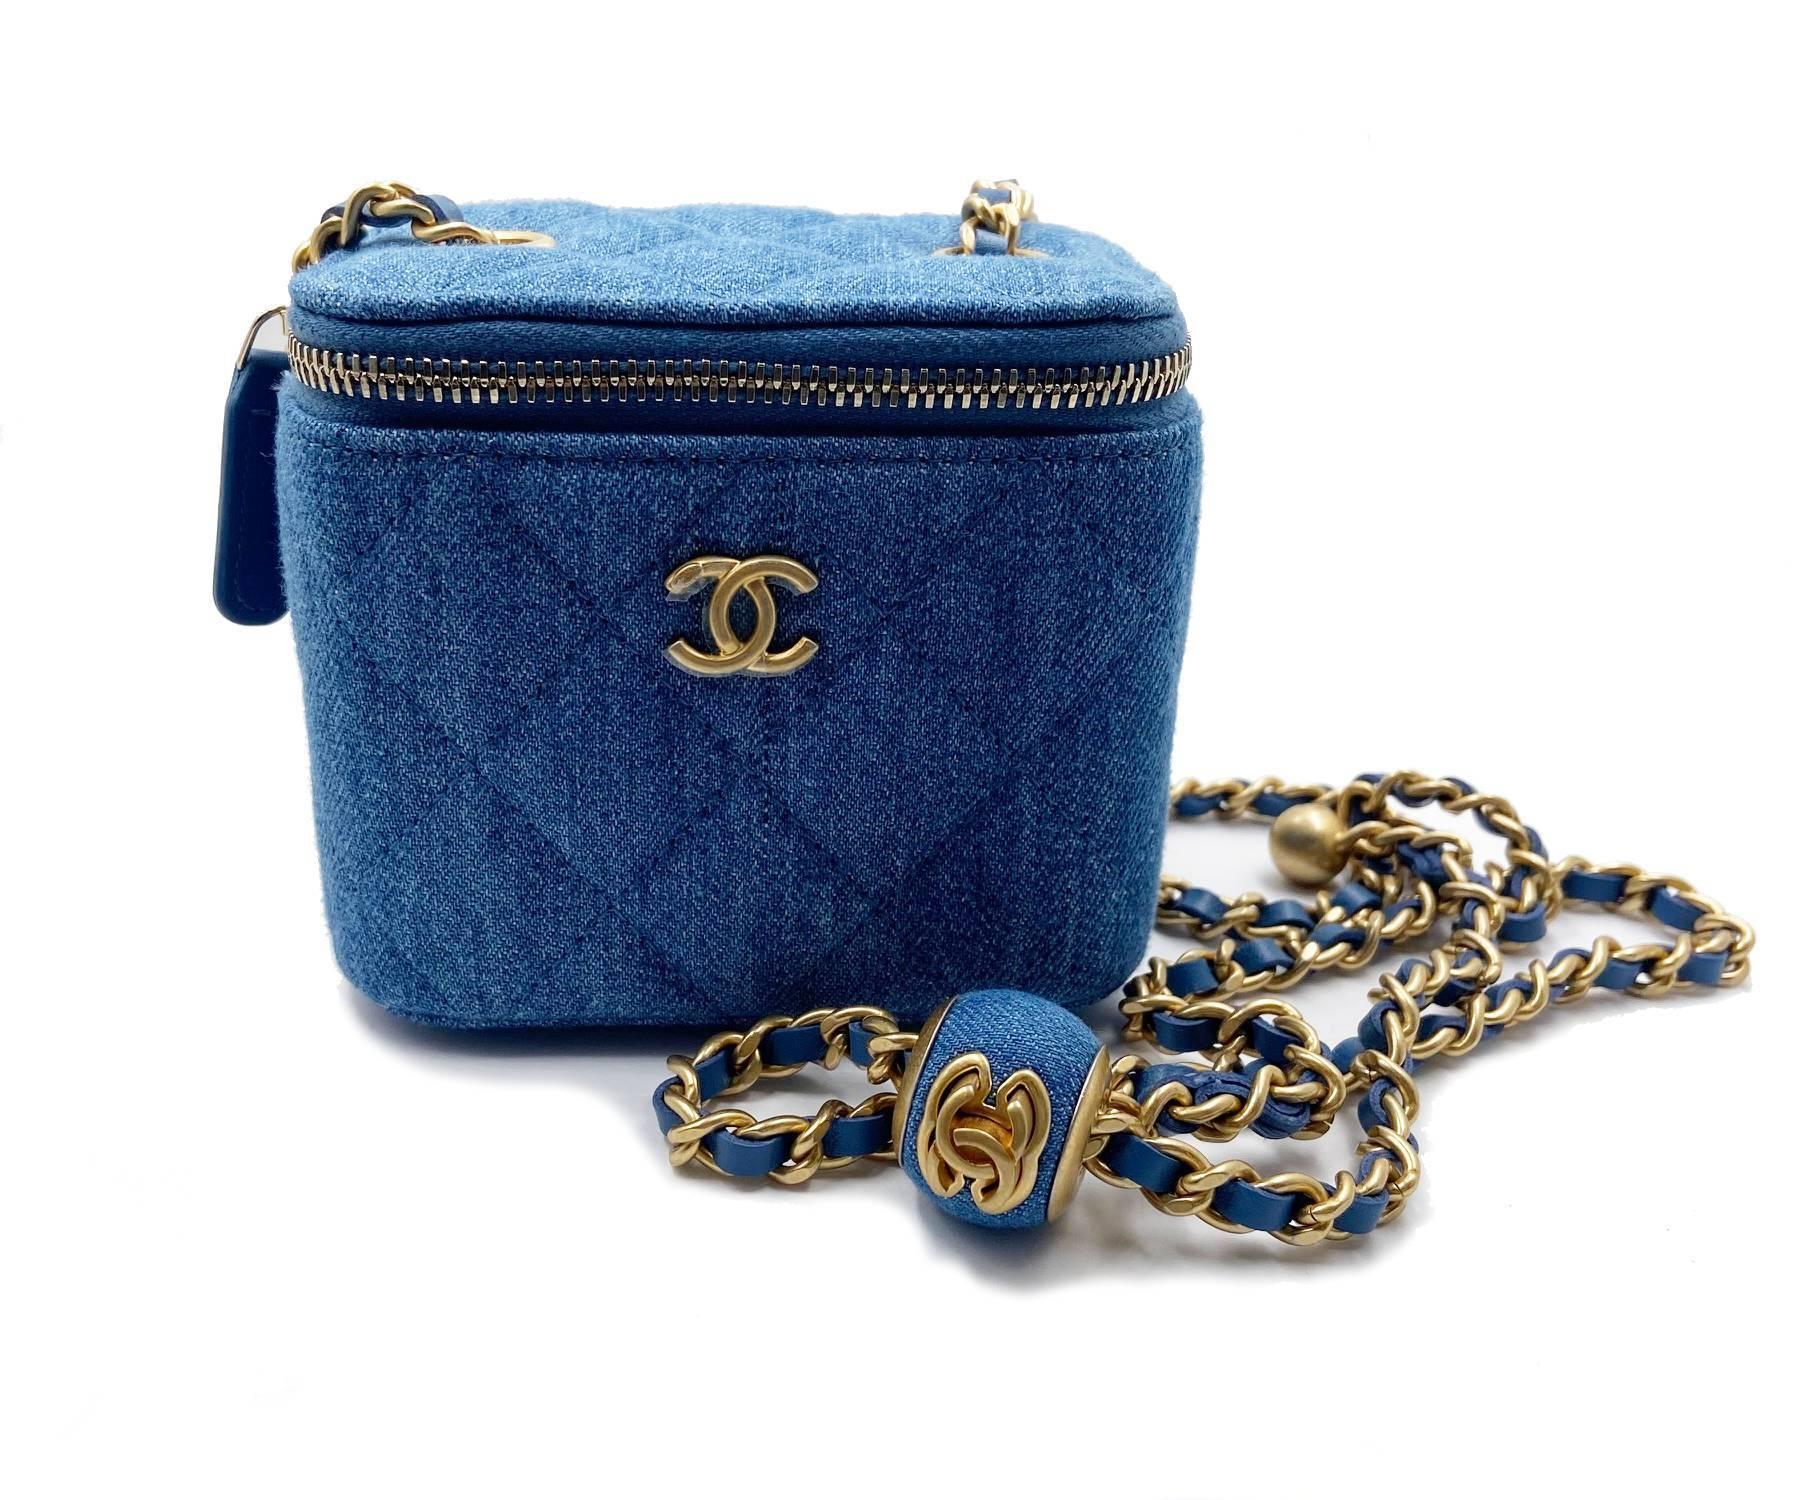 Chanel Brand New SOLD OUT Classic Timeless Denim Pearl Crush Mini Vanity Case Crossbody Shoulder Bag

*31xxxxxx (2021)
* Made in Italy
*Comes with control number card, tag, booklet, dustbag, box, camellia flower and ribbon
*Vintage Gold